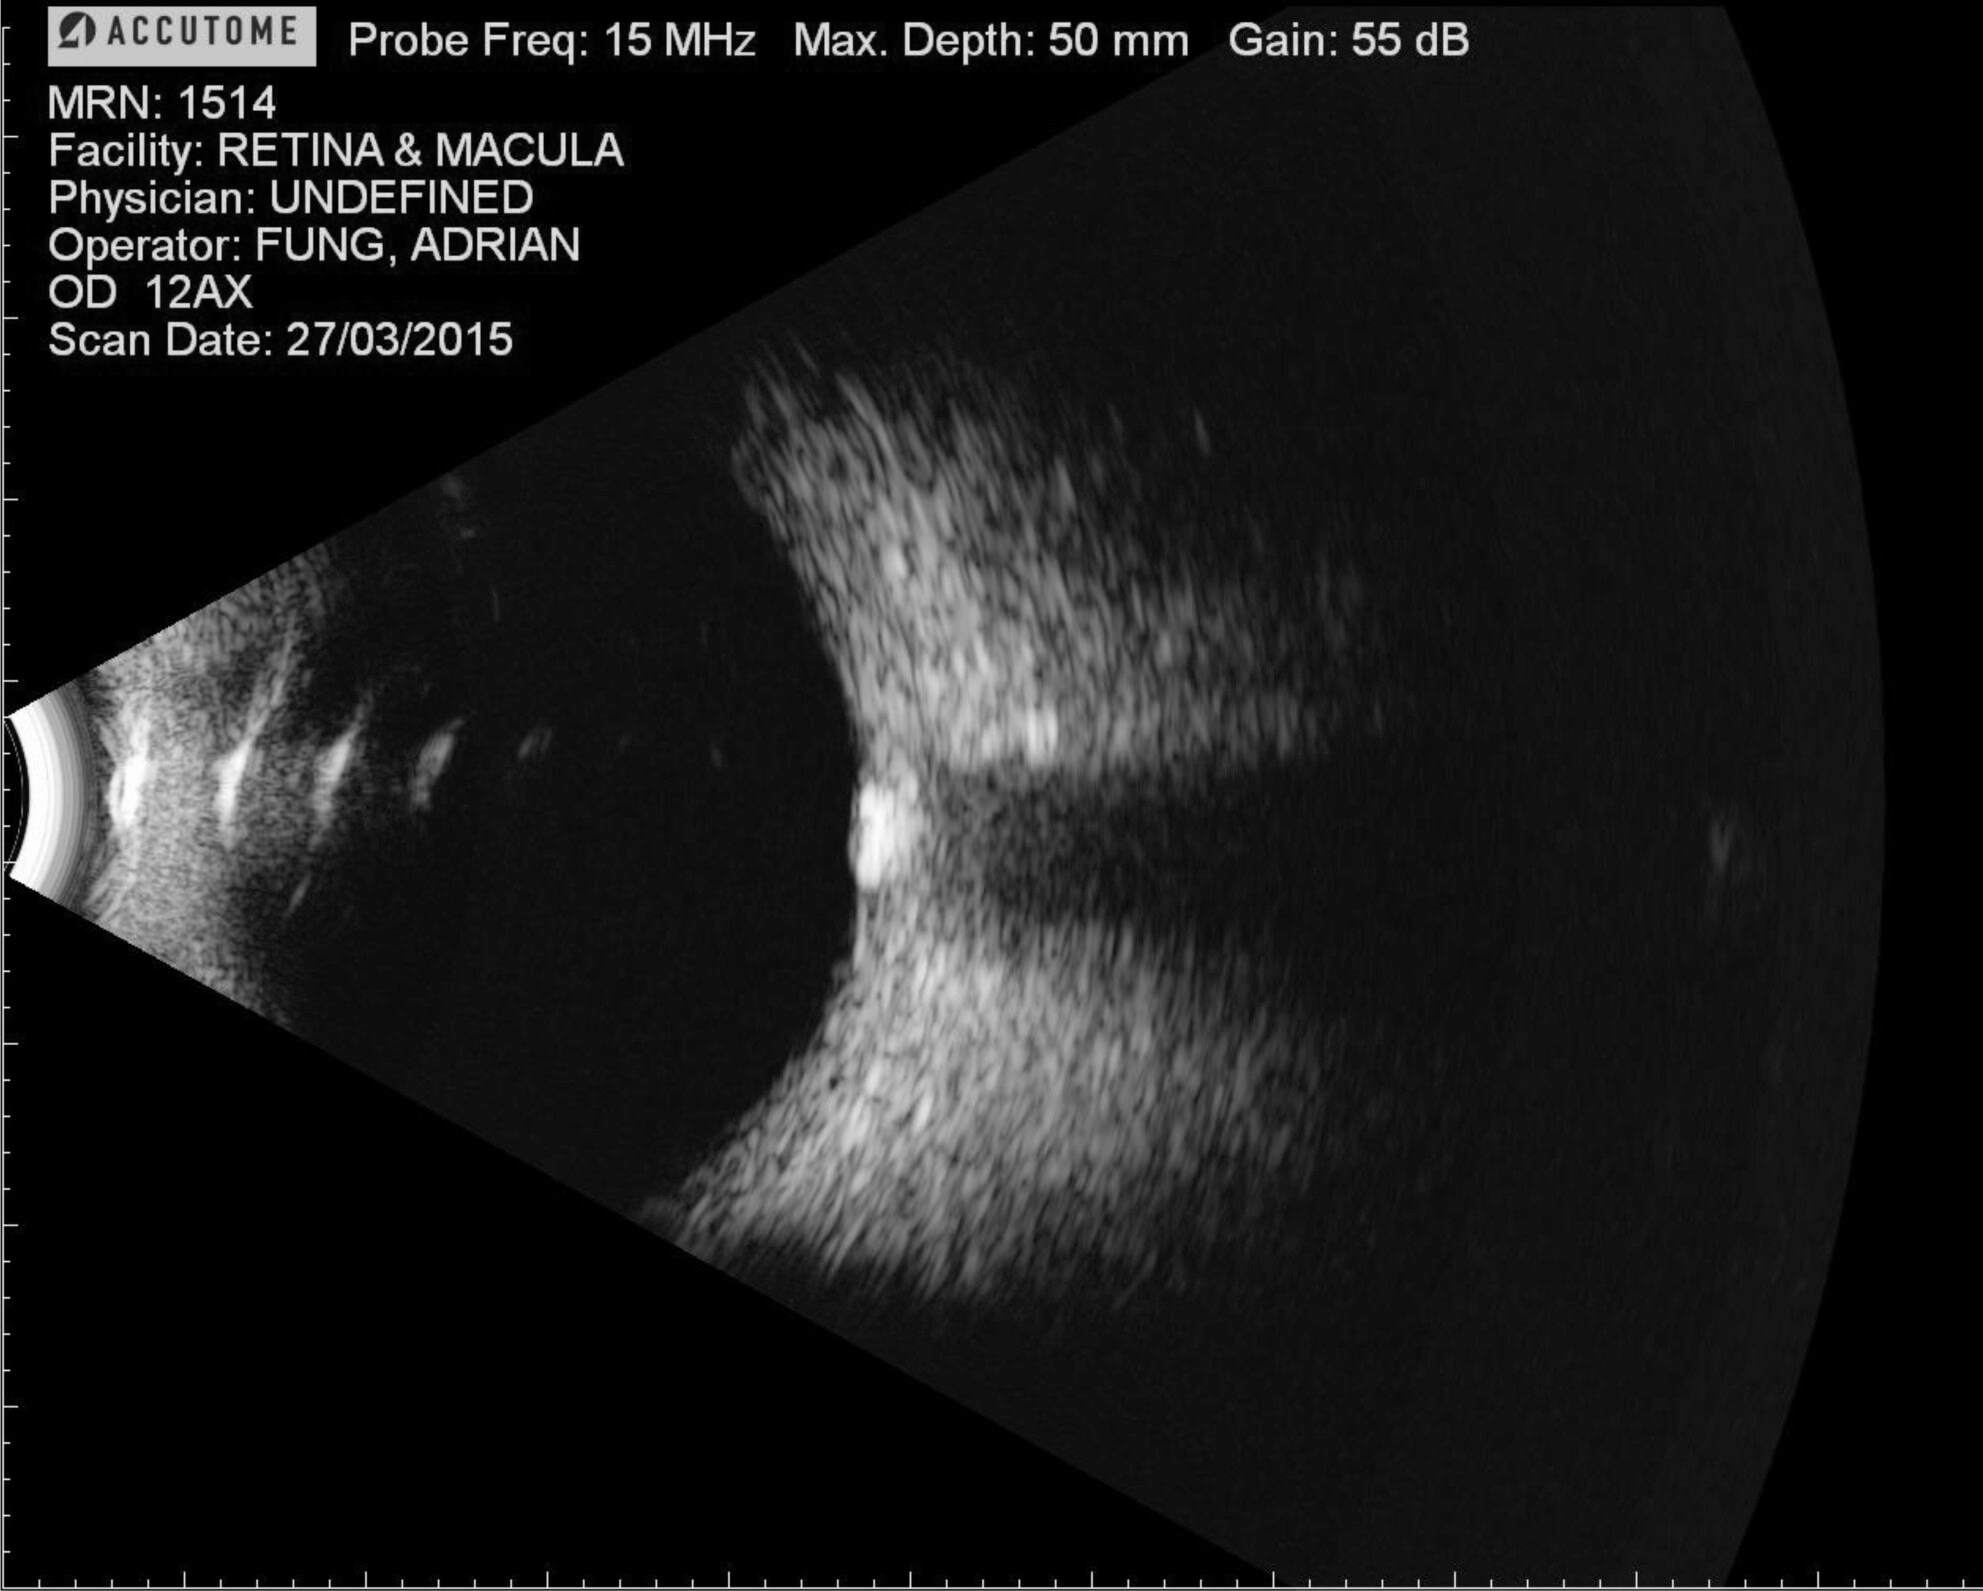 B-scan ultrasound shows a hyper-reflective mass at the optic nerve head.